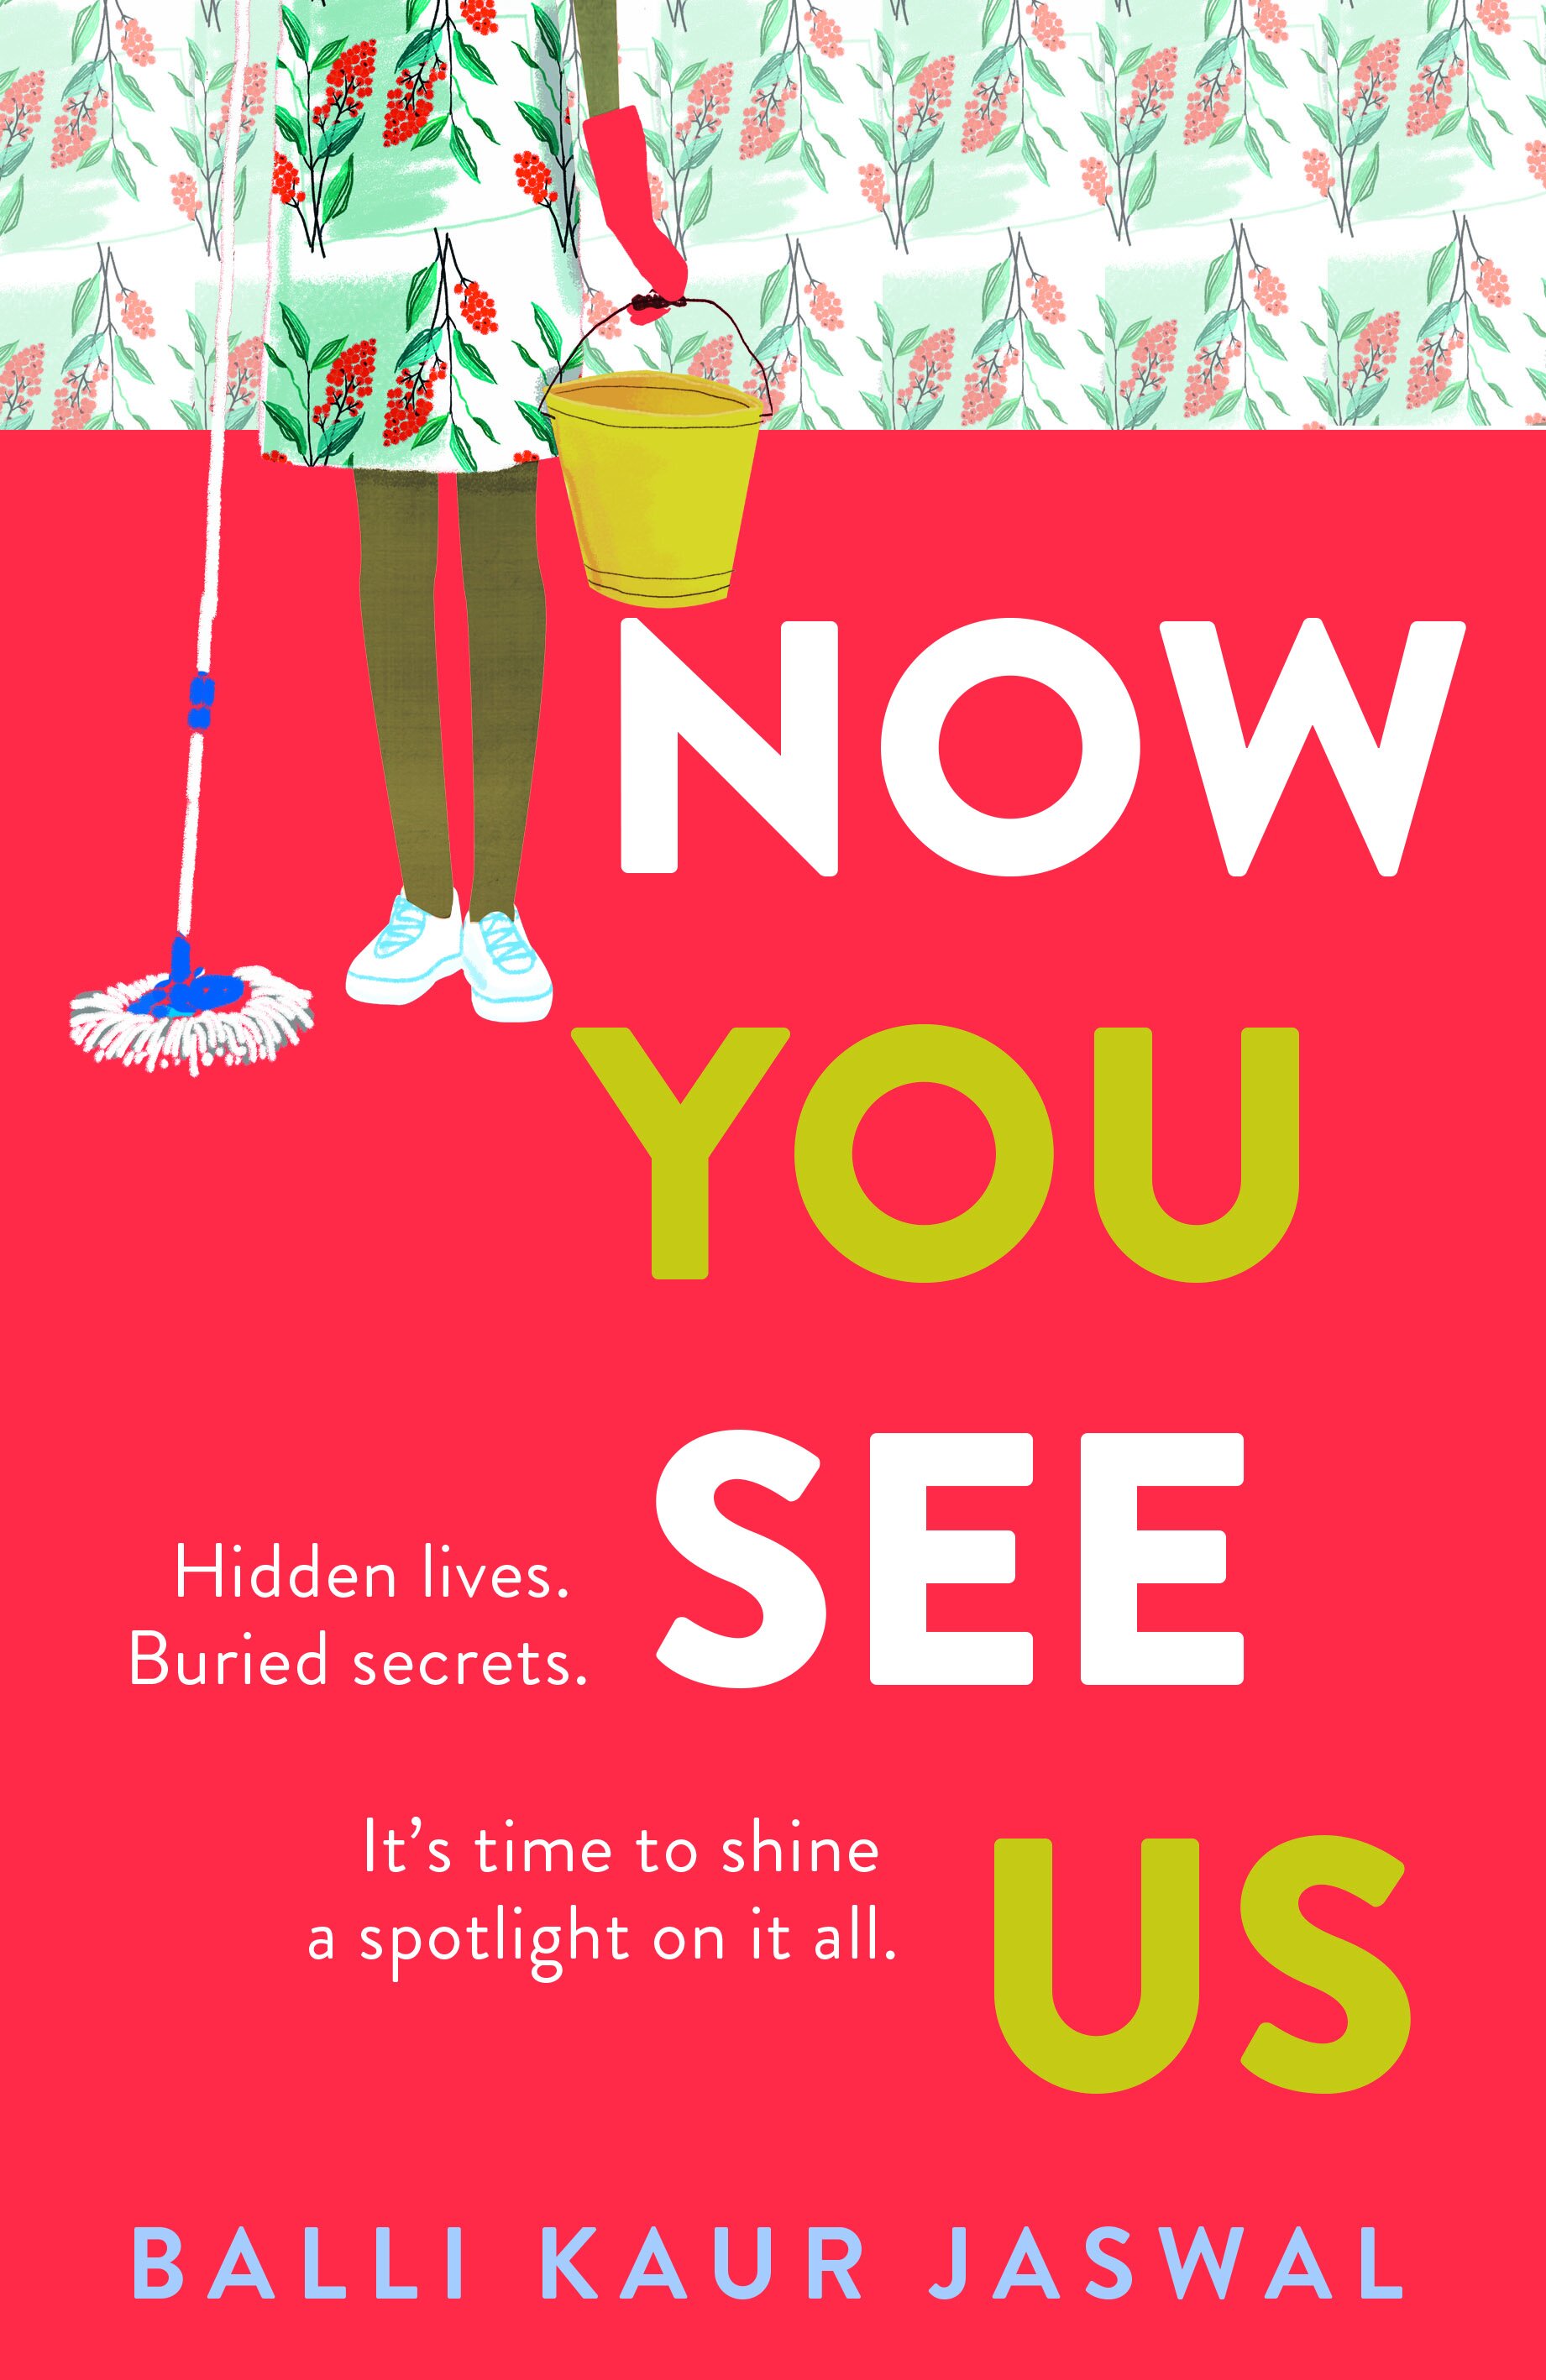 Now You See Us UK cover.jpg